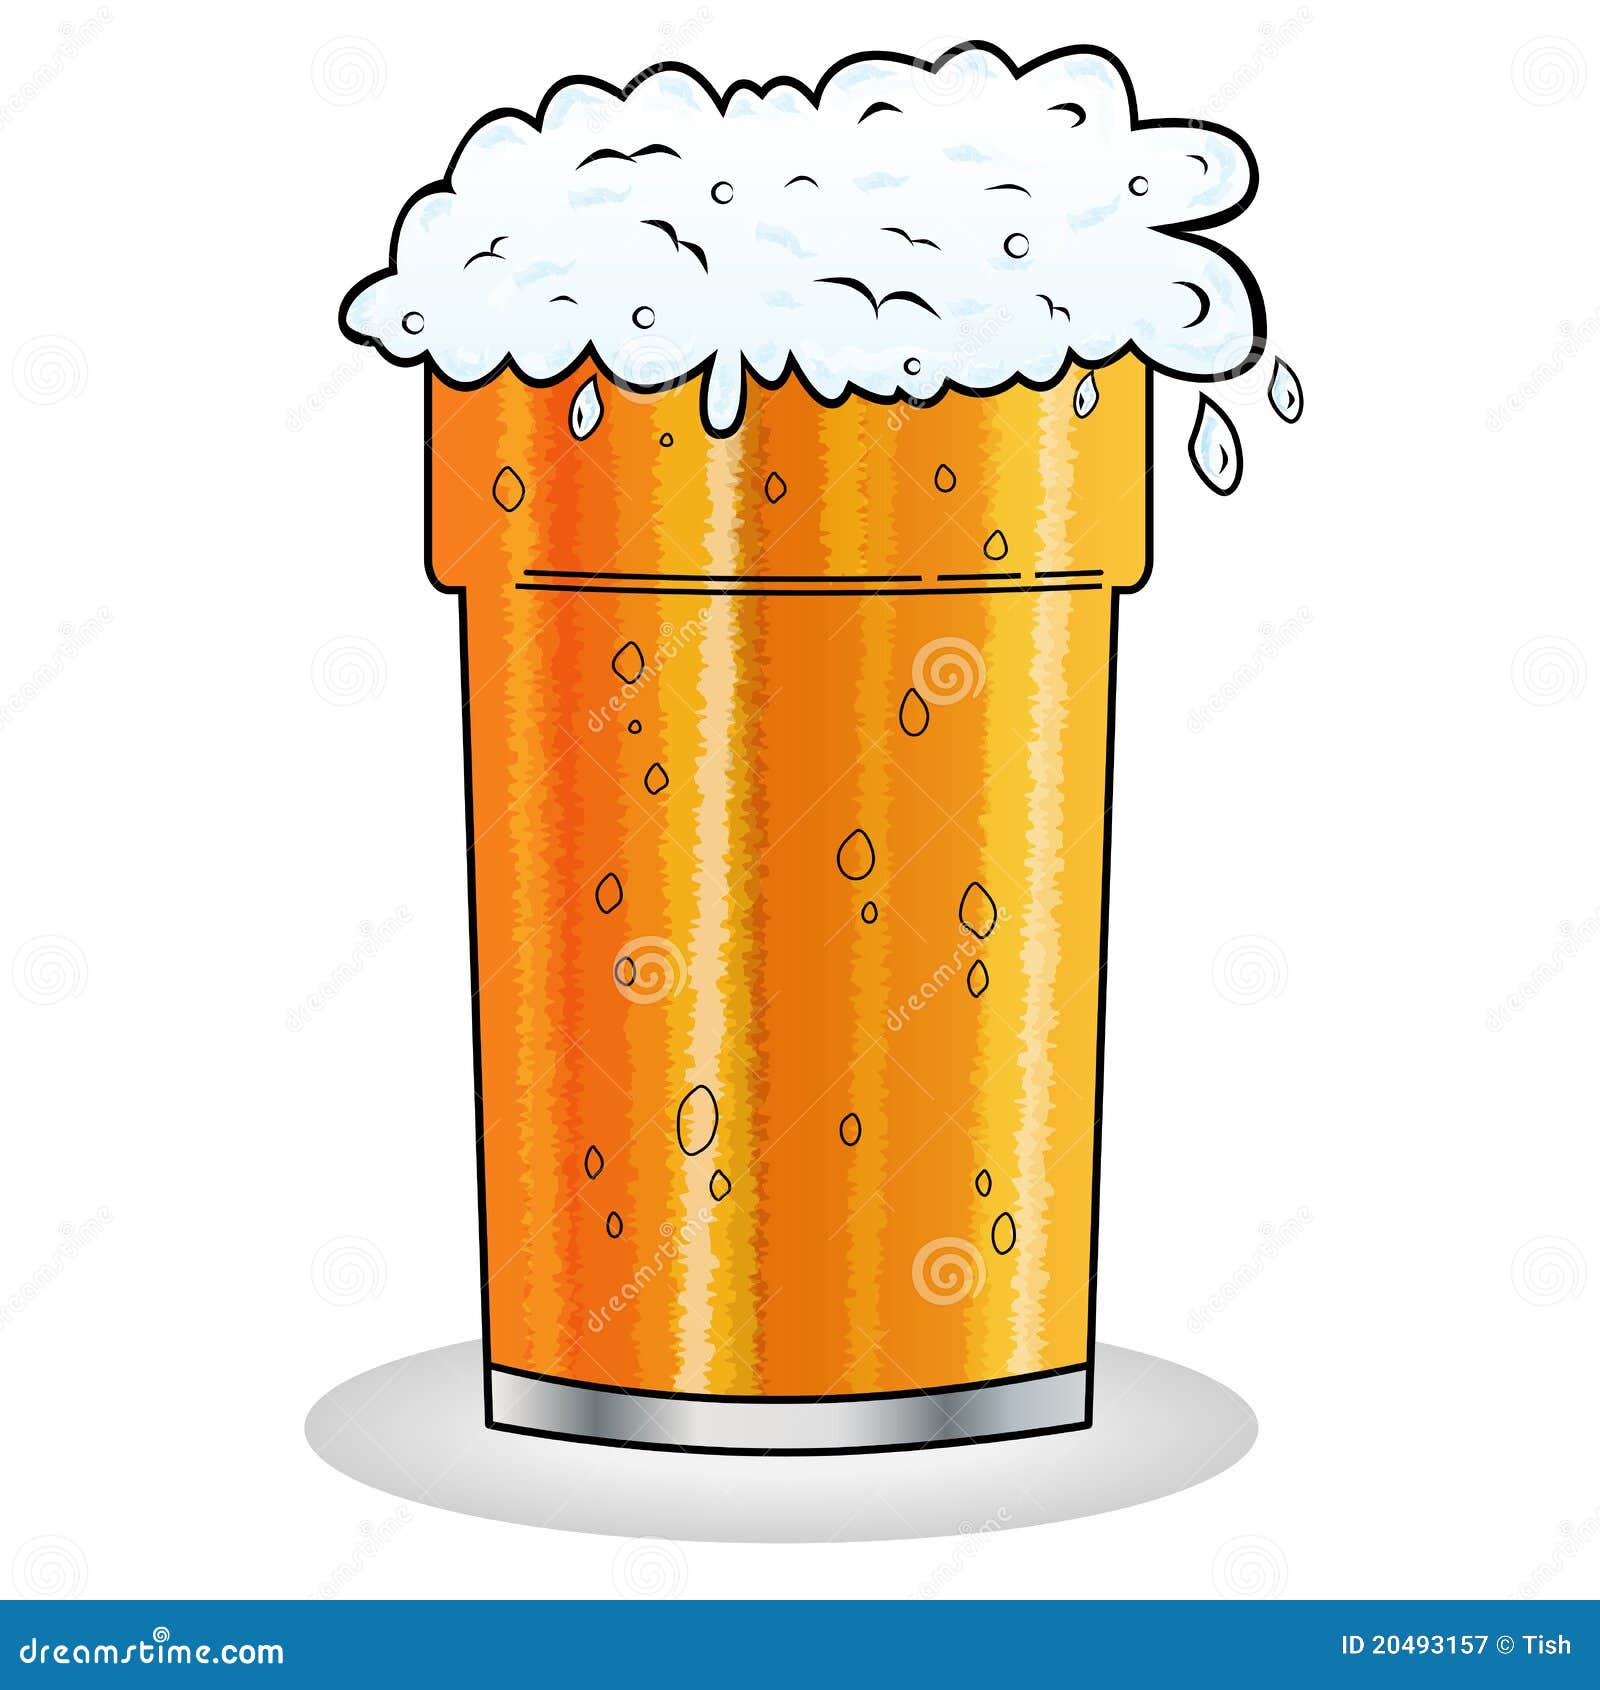 free clipart pint of beer - photo #31